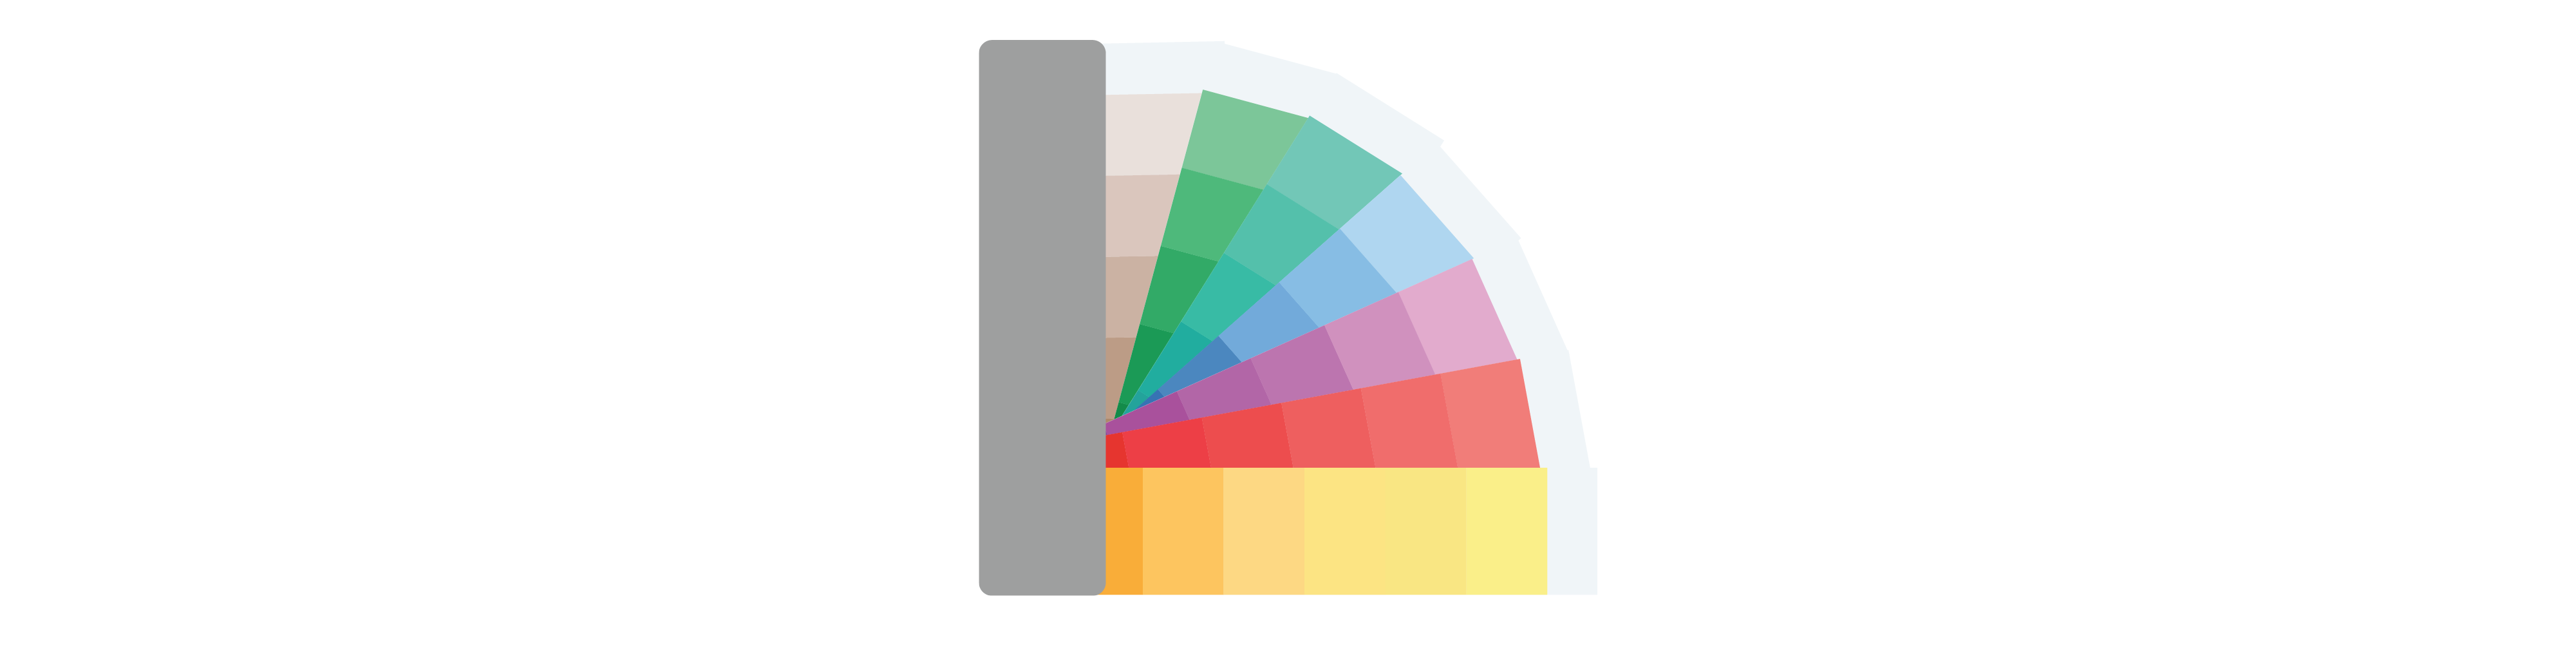 A colour swatch book with 7 paint swatches being fanned out from a grey strip. Top swatch is pink, followed by green, followed by turquoise, followed by blue, followed by purple, followed by red, followed by yellow. Each swatch starts with a lighter tone on top and gradually becomes darker over 4-6 rows.